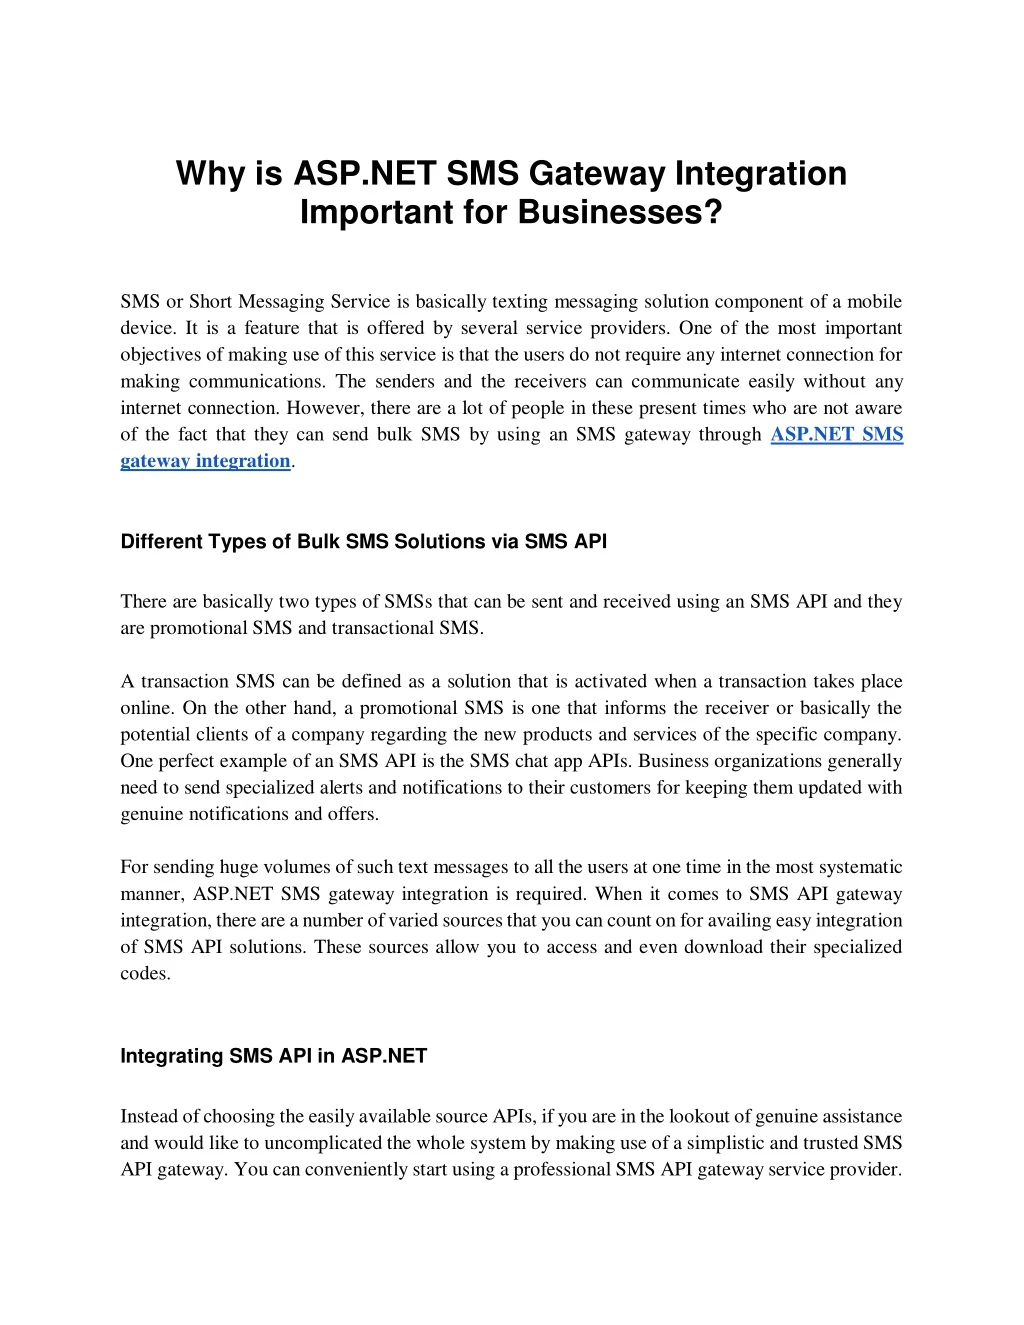 why is asp net sms gateway integration important